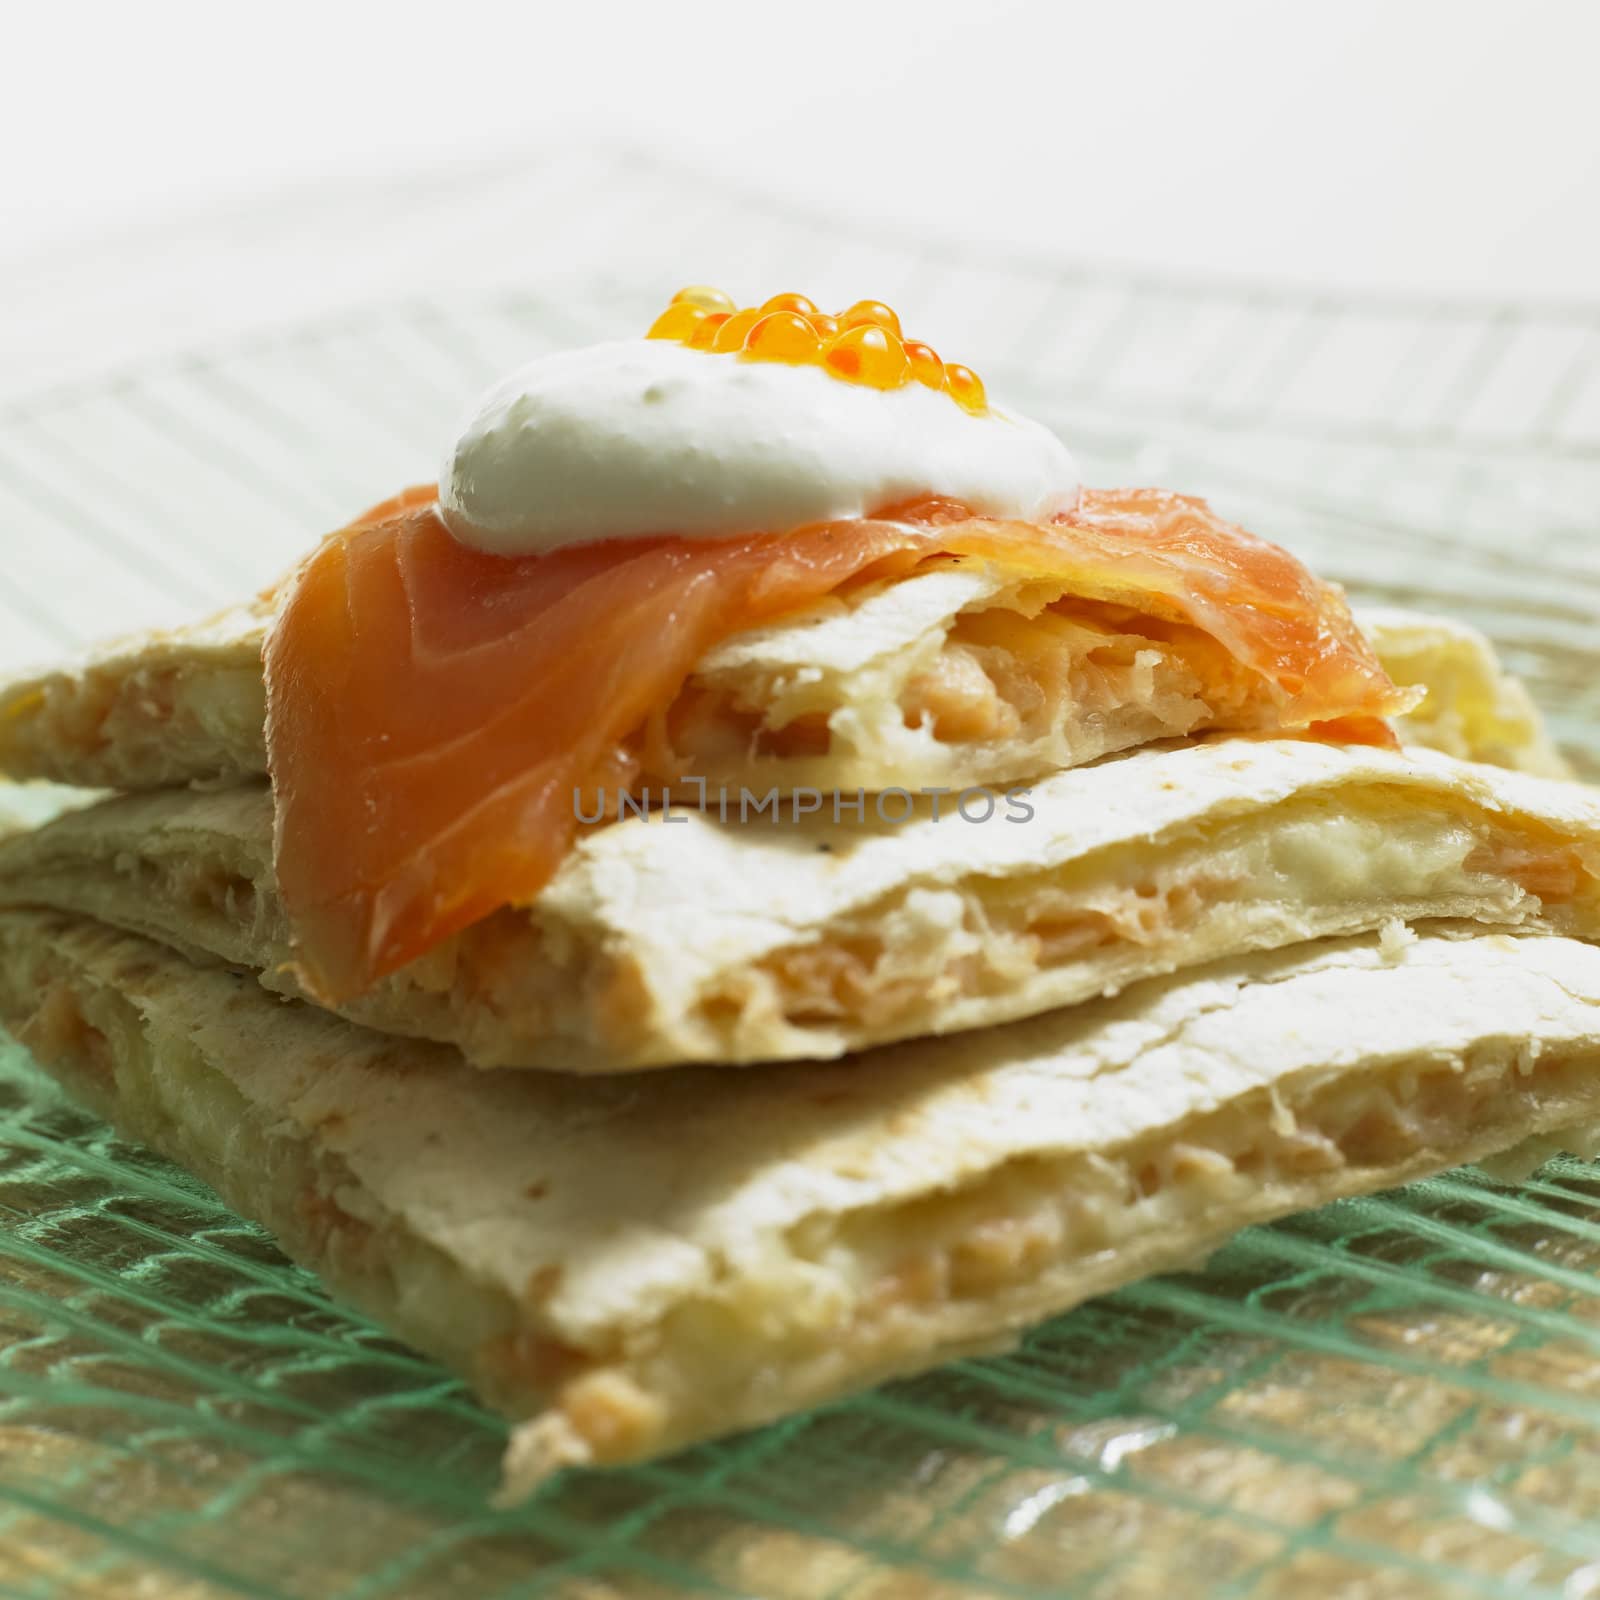 quesadilla with smoked salmon by phbcz